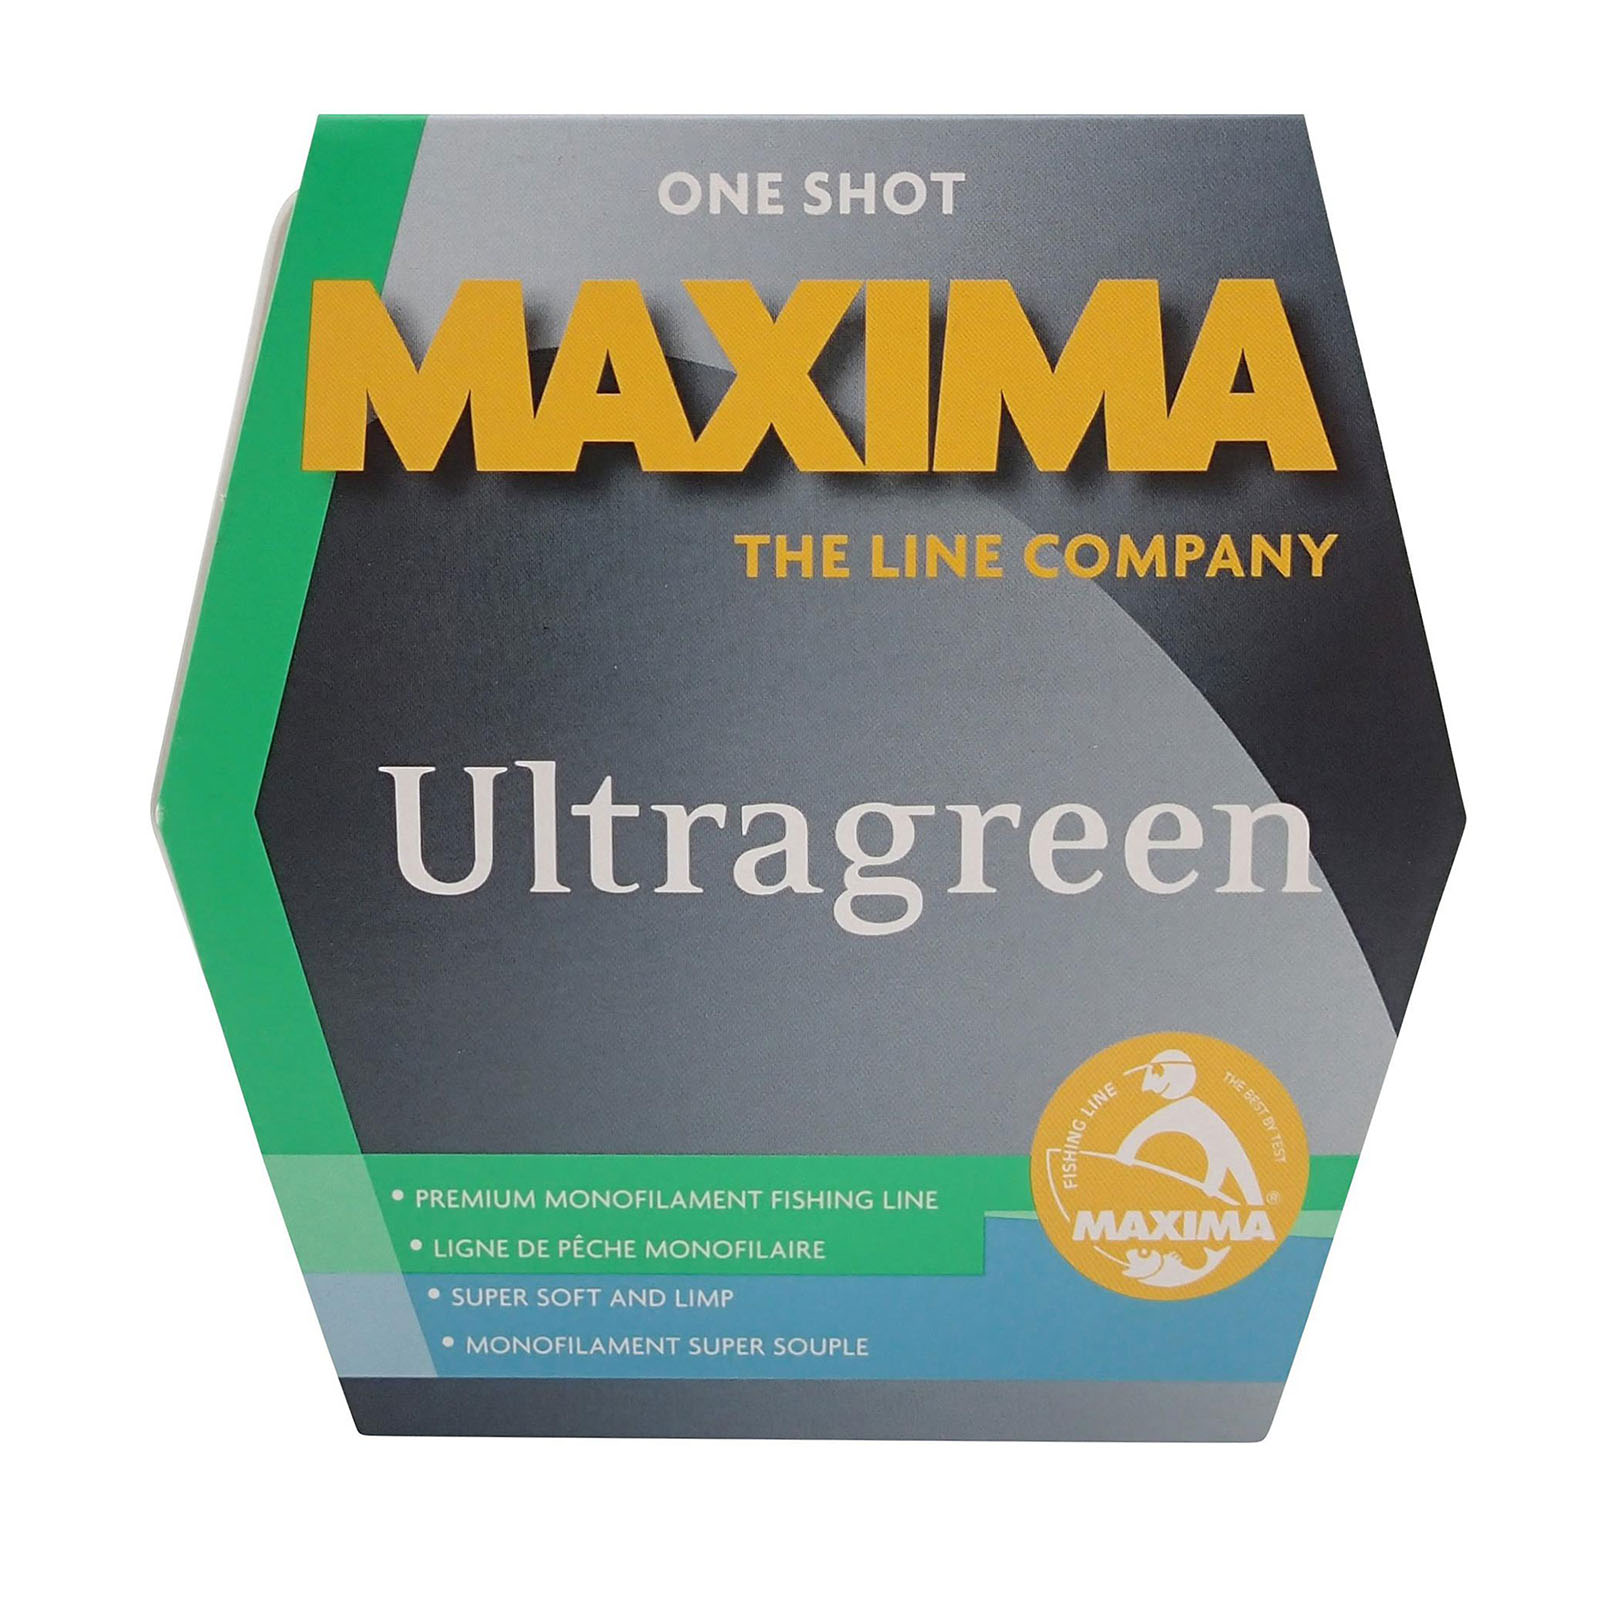 Maxima Chameleon One Shot Fishing Line – Ultimate Fishing and Outdoors